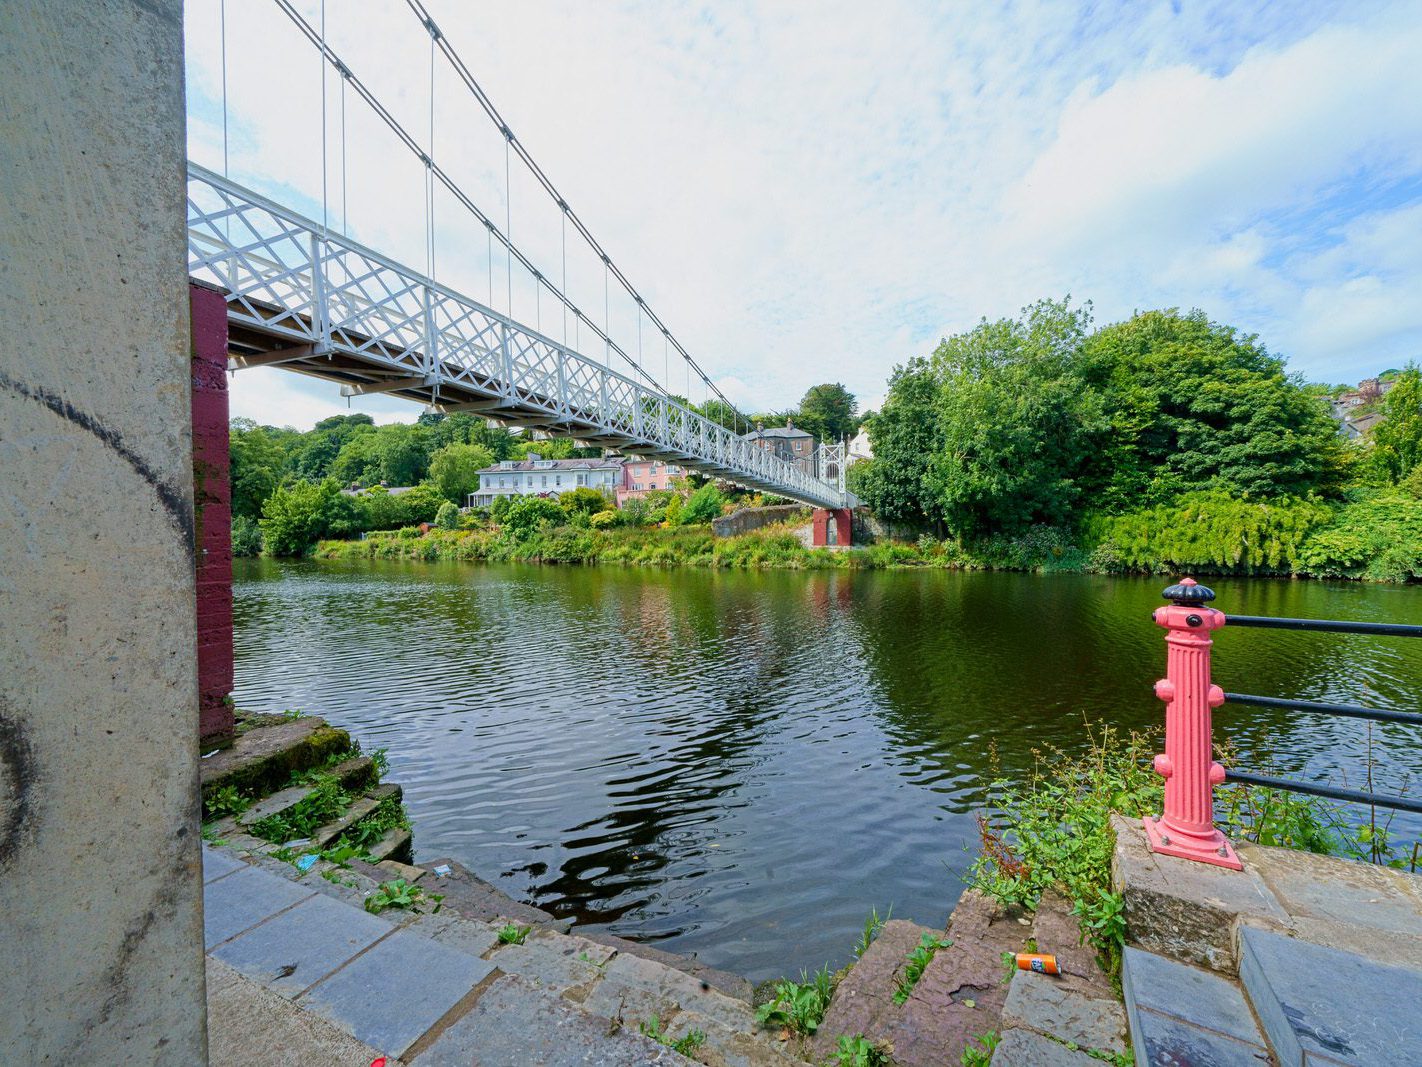 THE REPAIRED AND RESTORED SHAKEY BRIDGE ACROSS THE RIVER LEE [THERE IS A LITTLE TEDDY BEAR IN SOME OF THE IMAGES]-224563-1